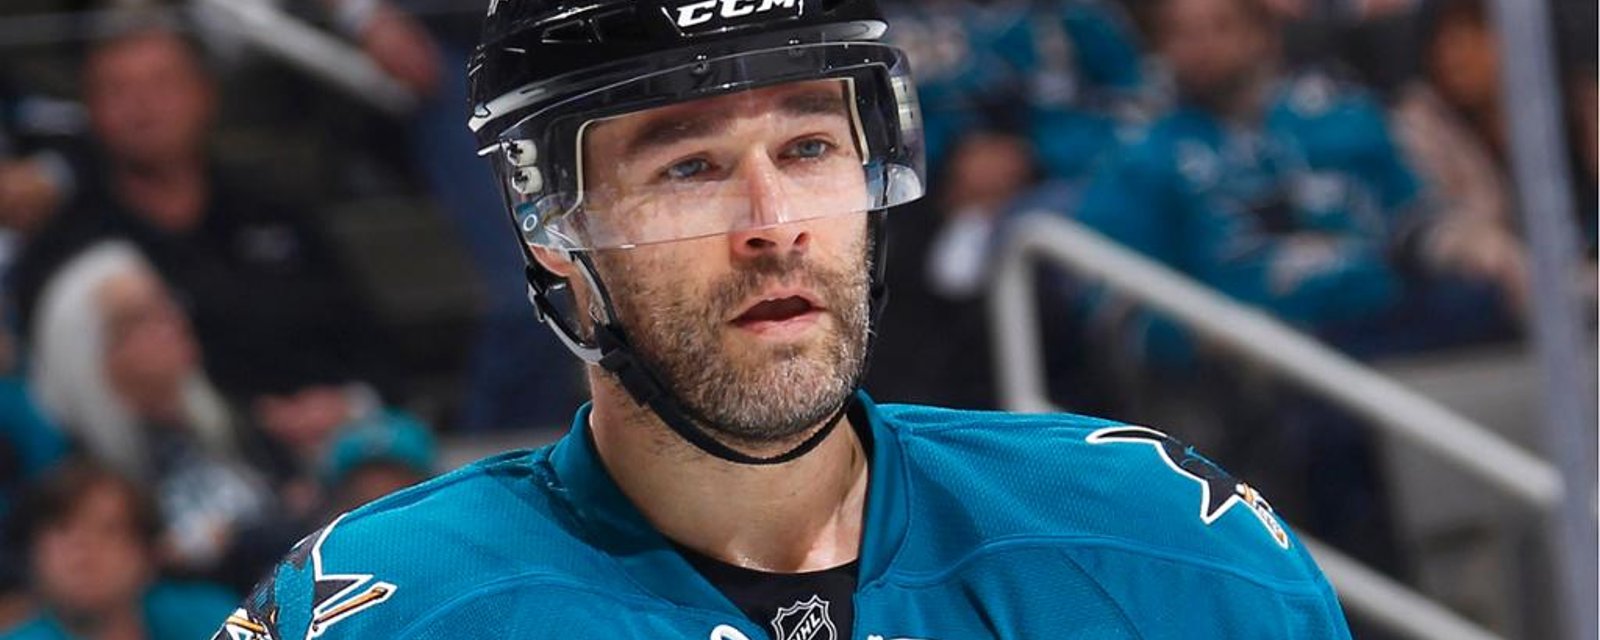 Patrick Marleau on the verge of signing new NHL contract 